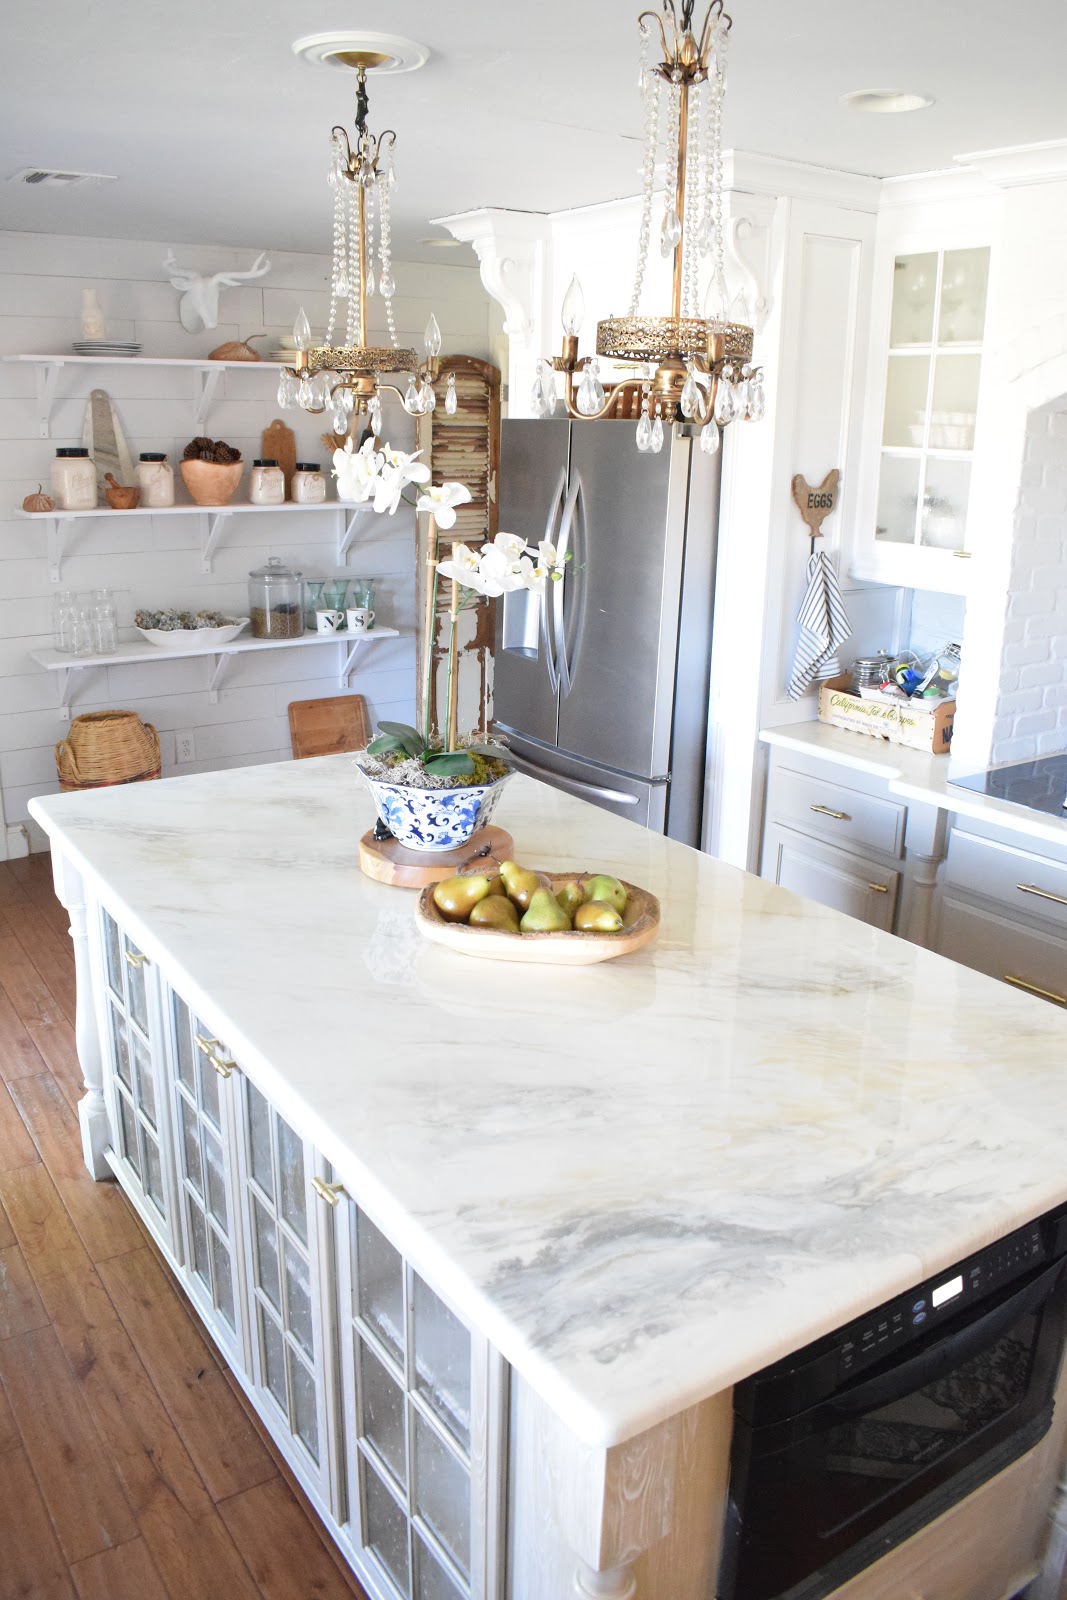 DIY Countertop Paint Kits: 17 DIY Countertops to Update Your Kitchen this Weekend on a Budget